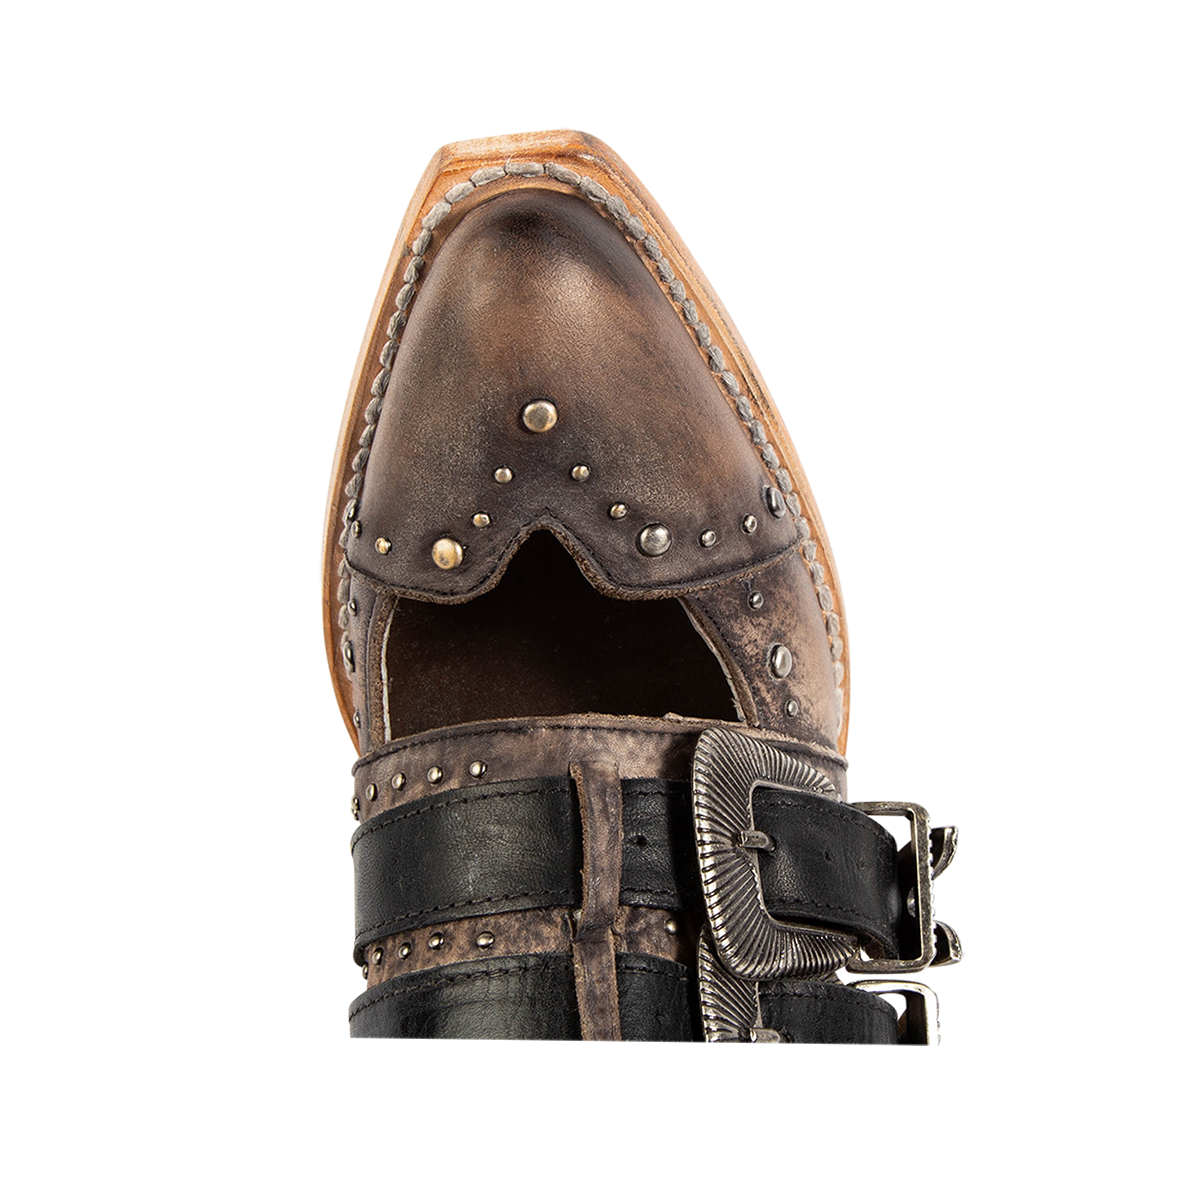 Top view showing a pointed toe and adjustable engraved buckles on FREEBIRD women's Judge black leather bootie